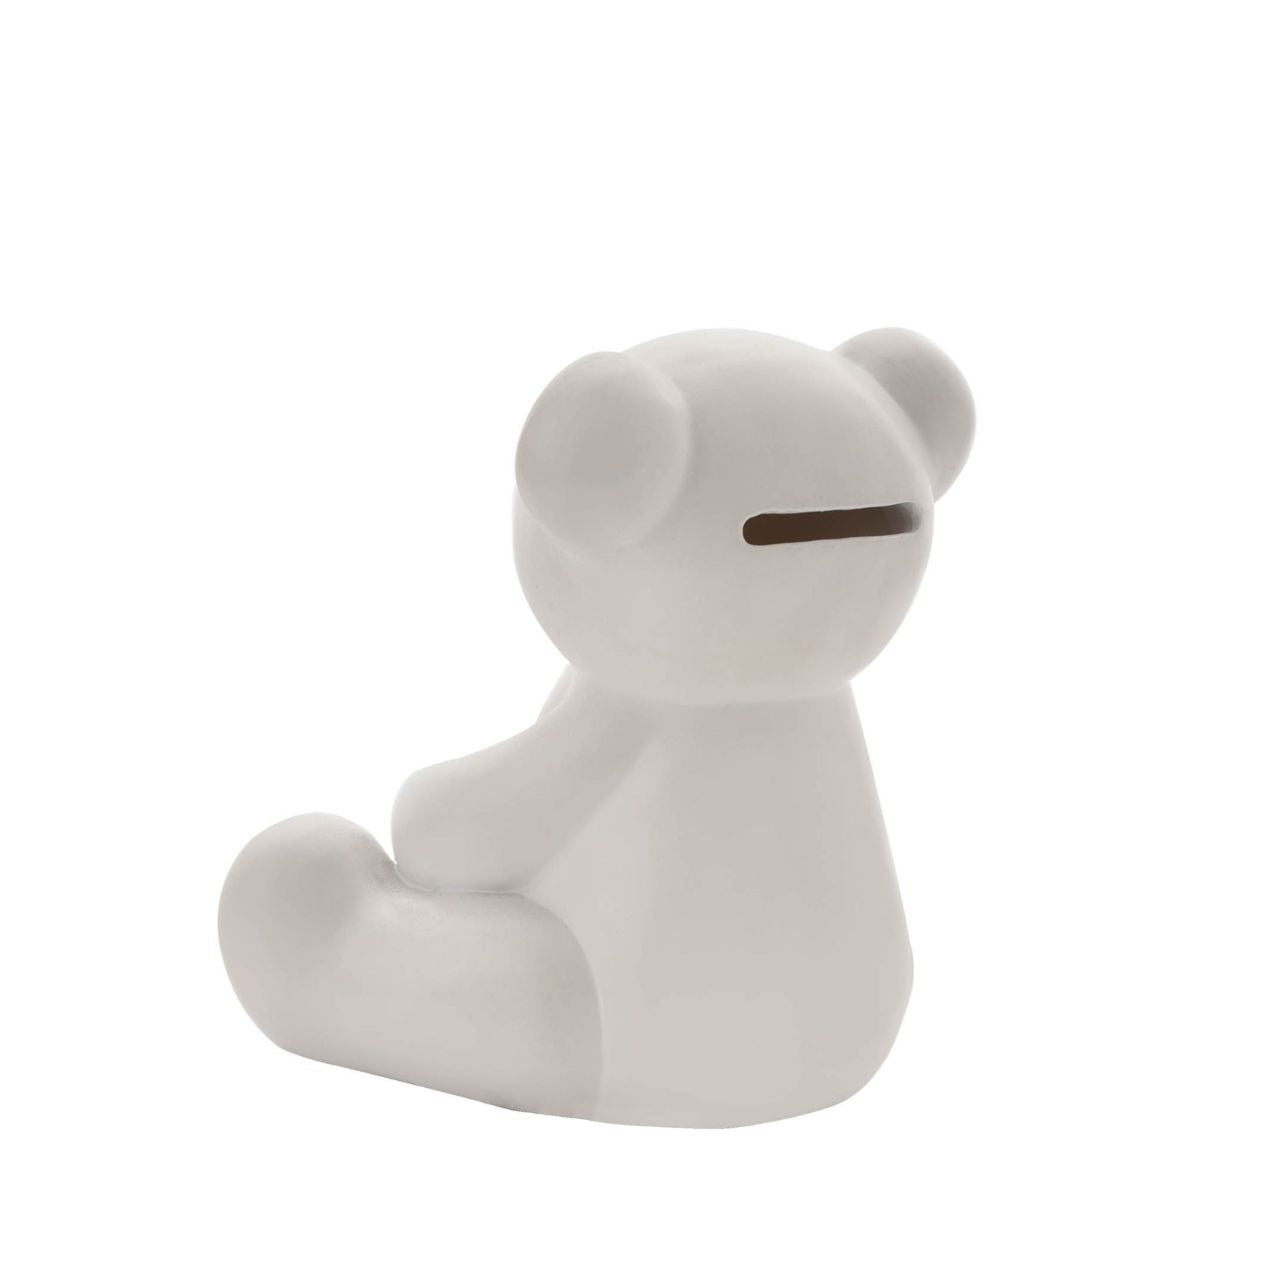 White Resin Money Box - Teddy  A teddy bear shaped resin money box from BAMBINO BY JULIANA.  This wonderful keepsake provides beautiful decoration for the nursery of new family arrivals which will be cherished eternally.